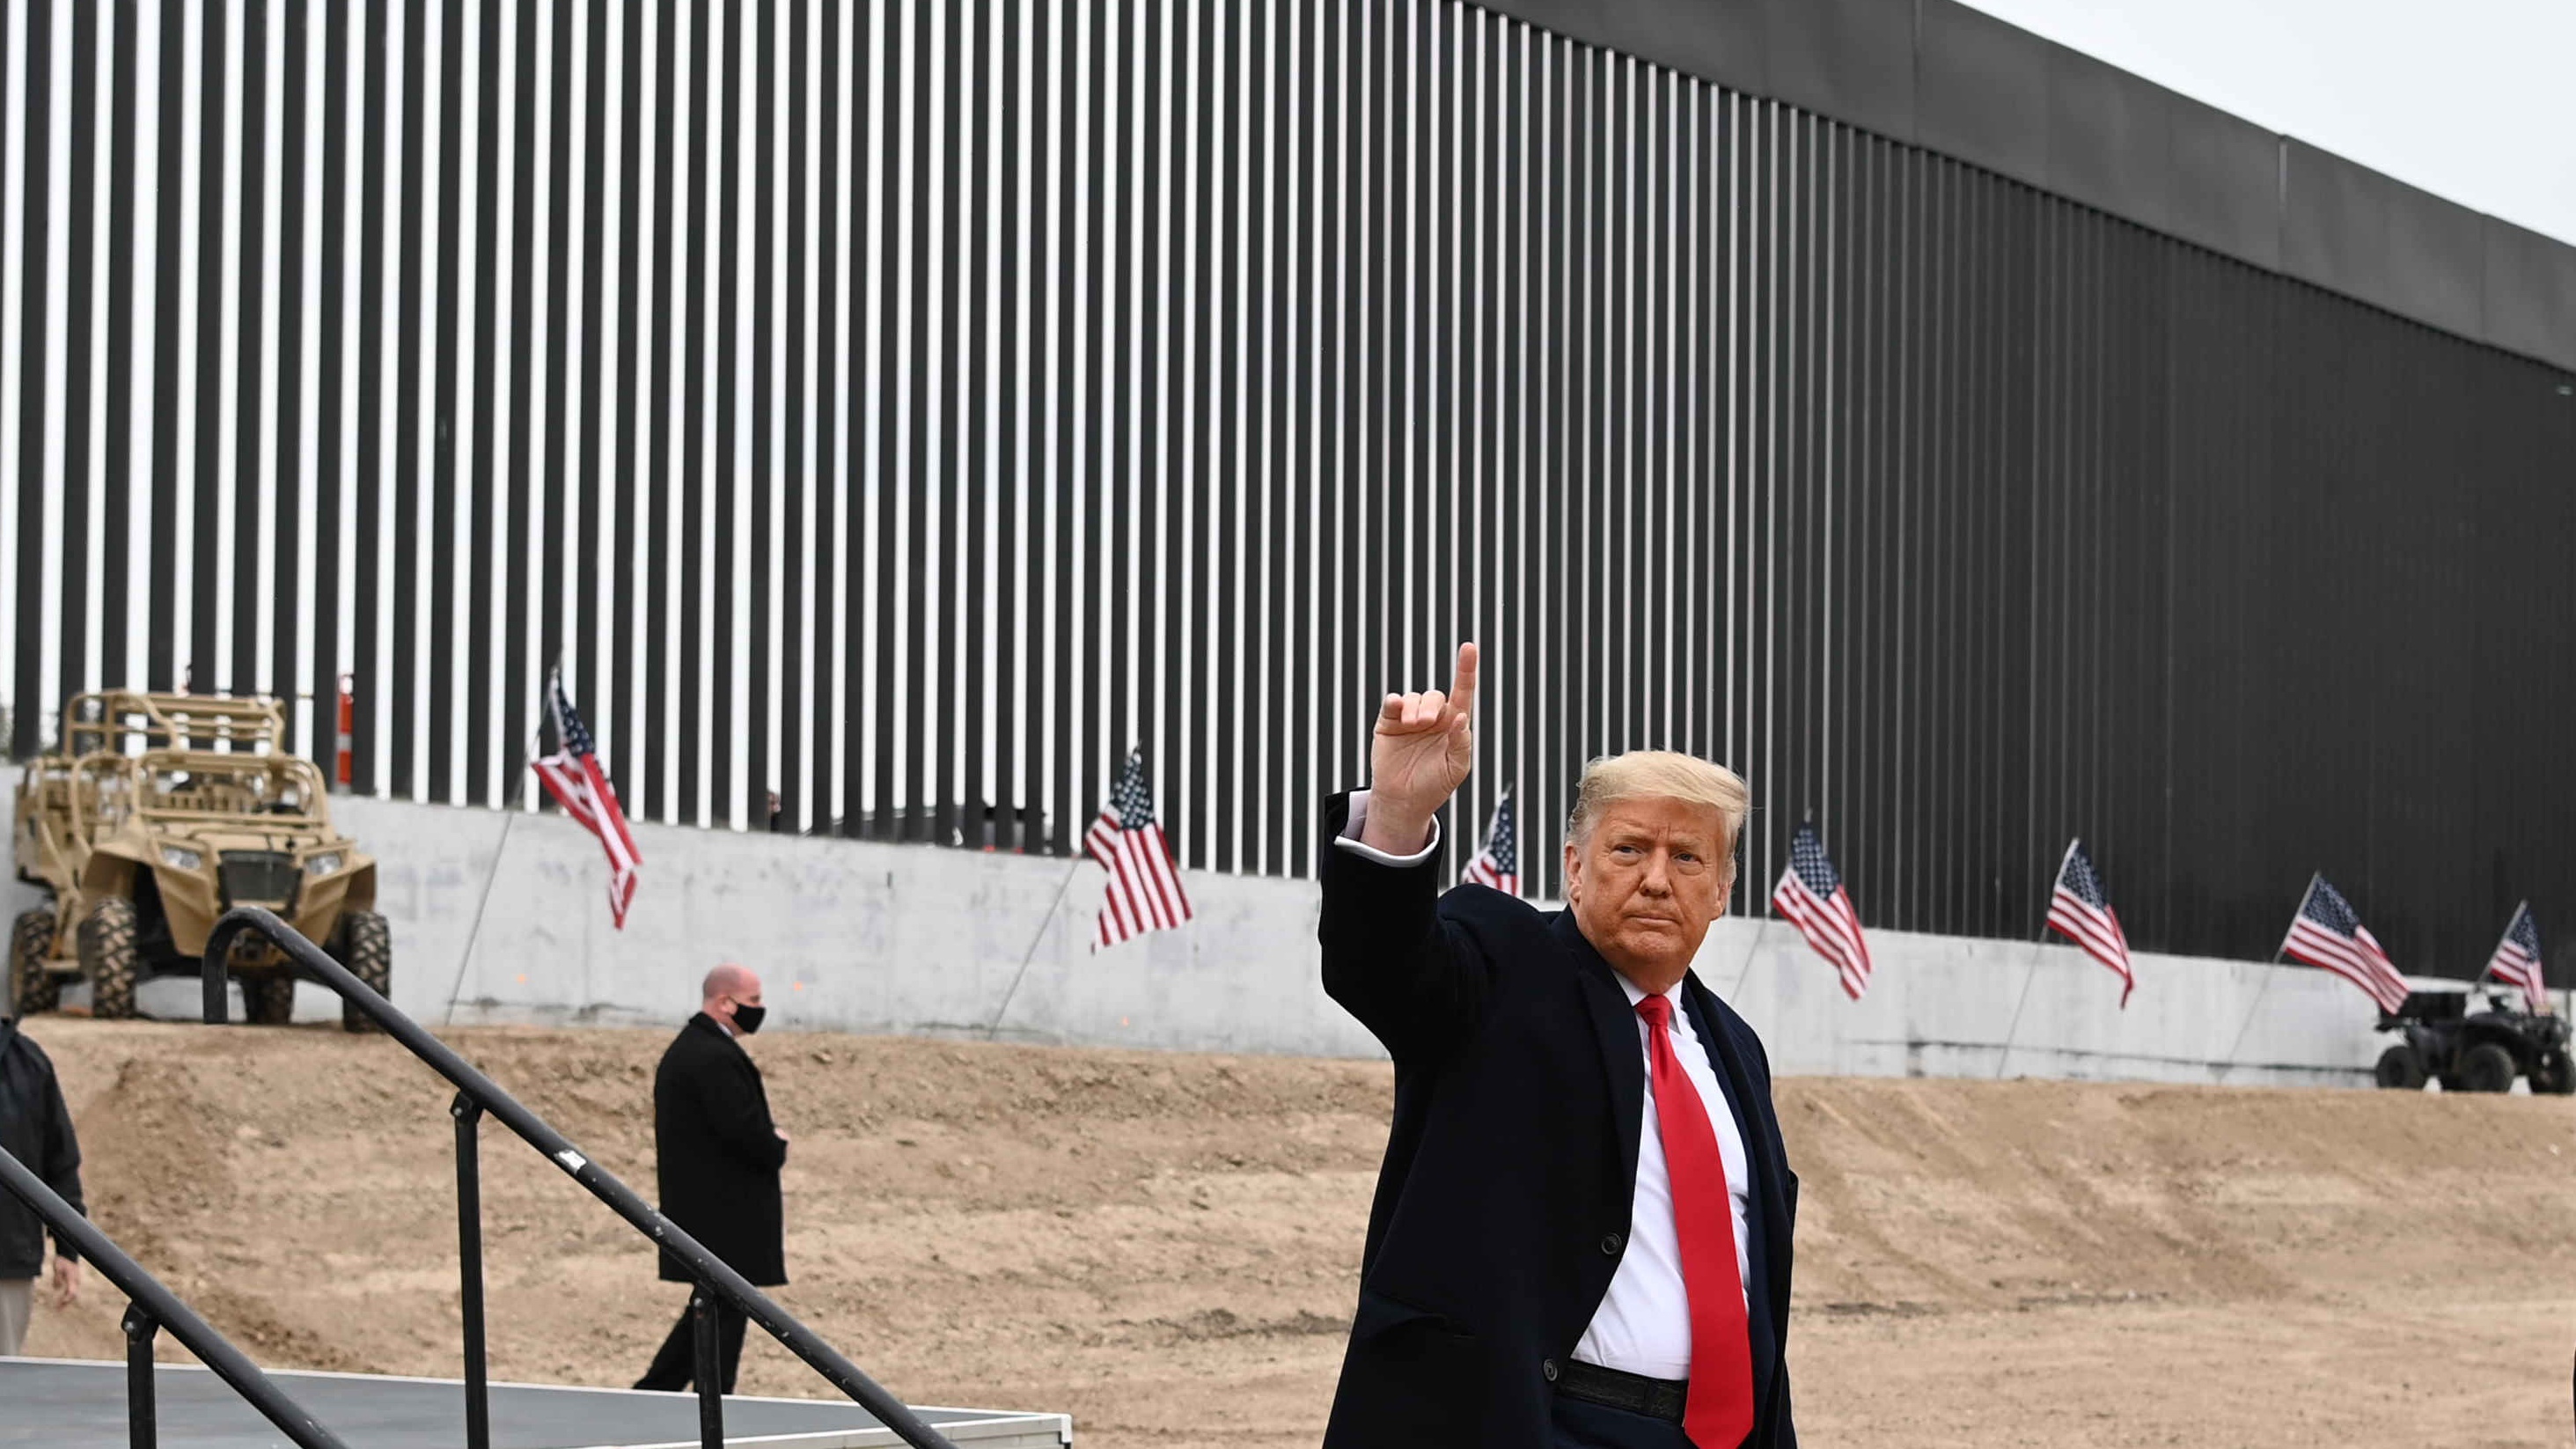 Donald Trump tours a section of the border wall in Alamo, Texas.